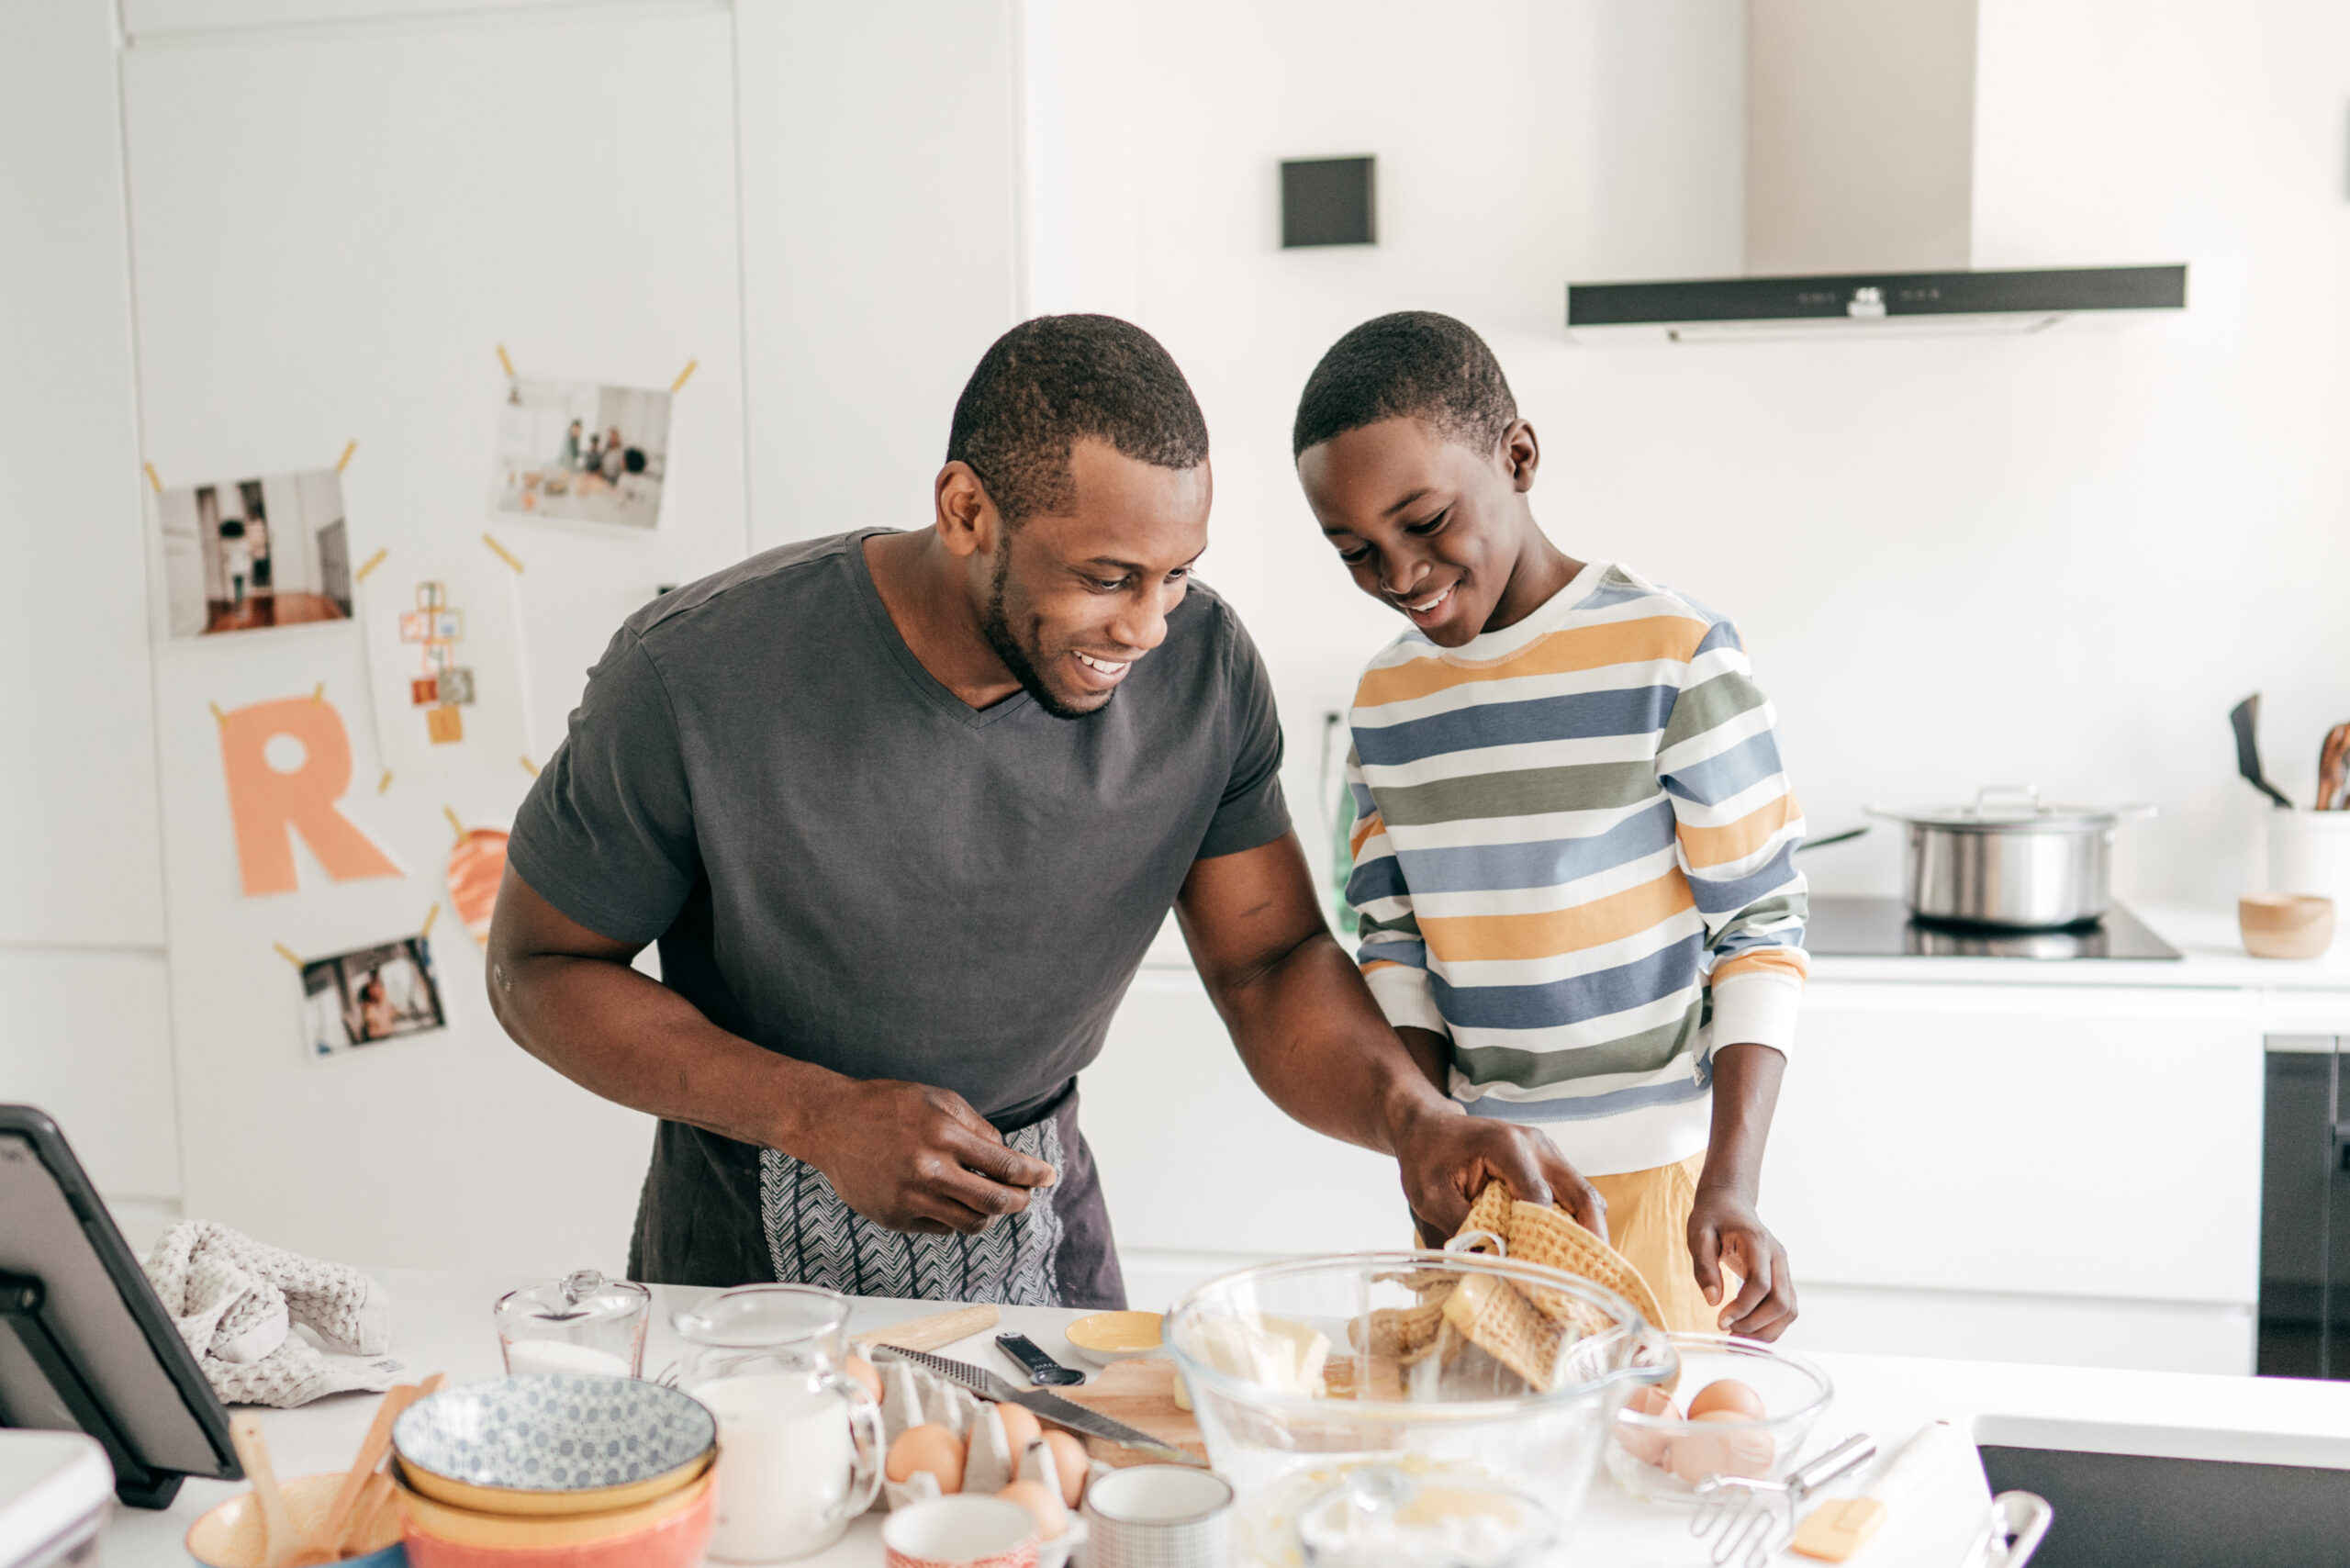 Growing Together: A Three-Part Guide for Following Jesus and Bringing Friends on the Journey | Navigators Discipleship Resource | Cleanin little mess during the cooking time